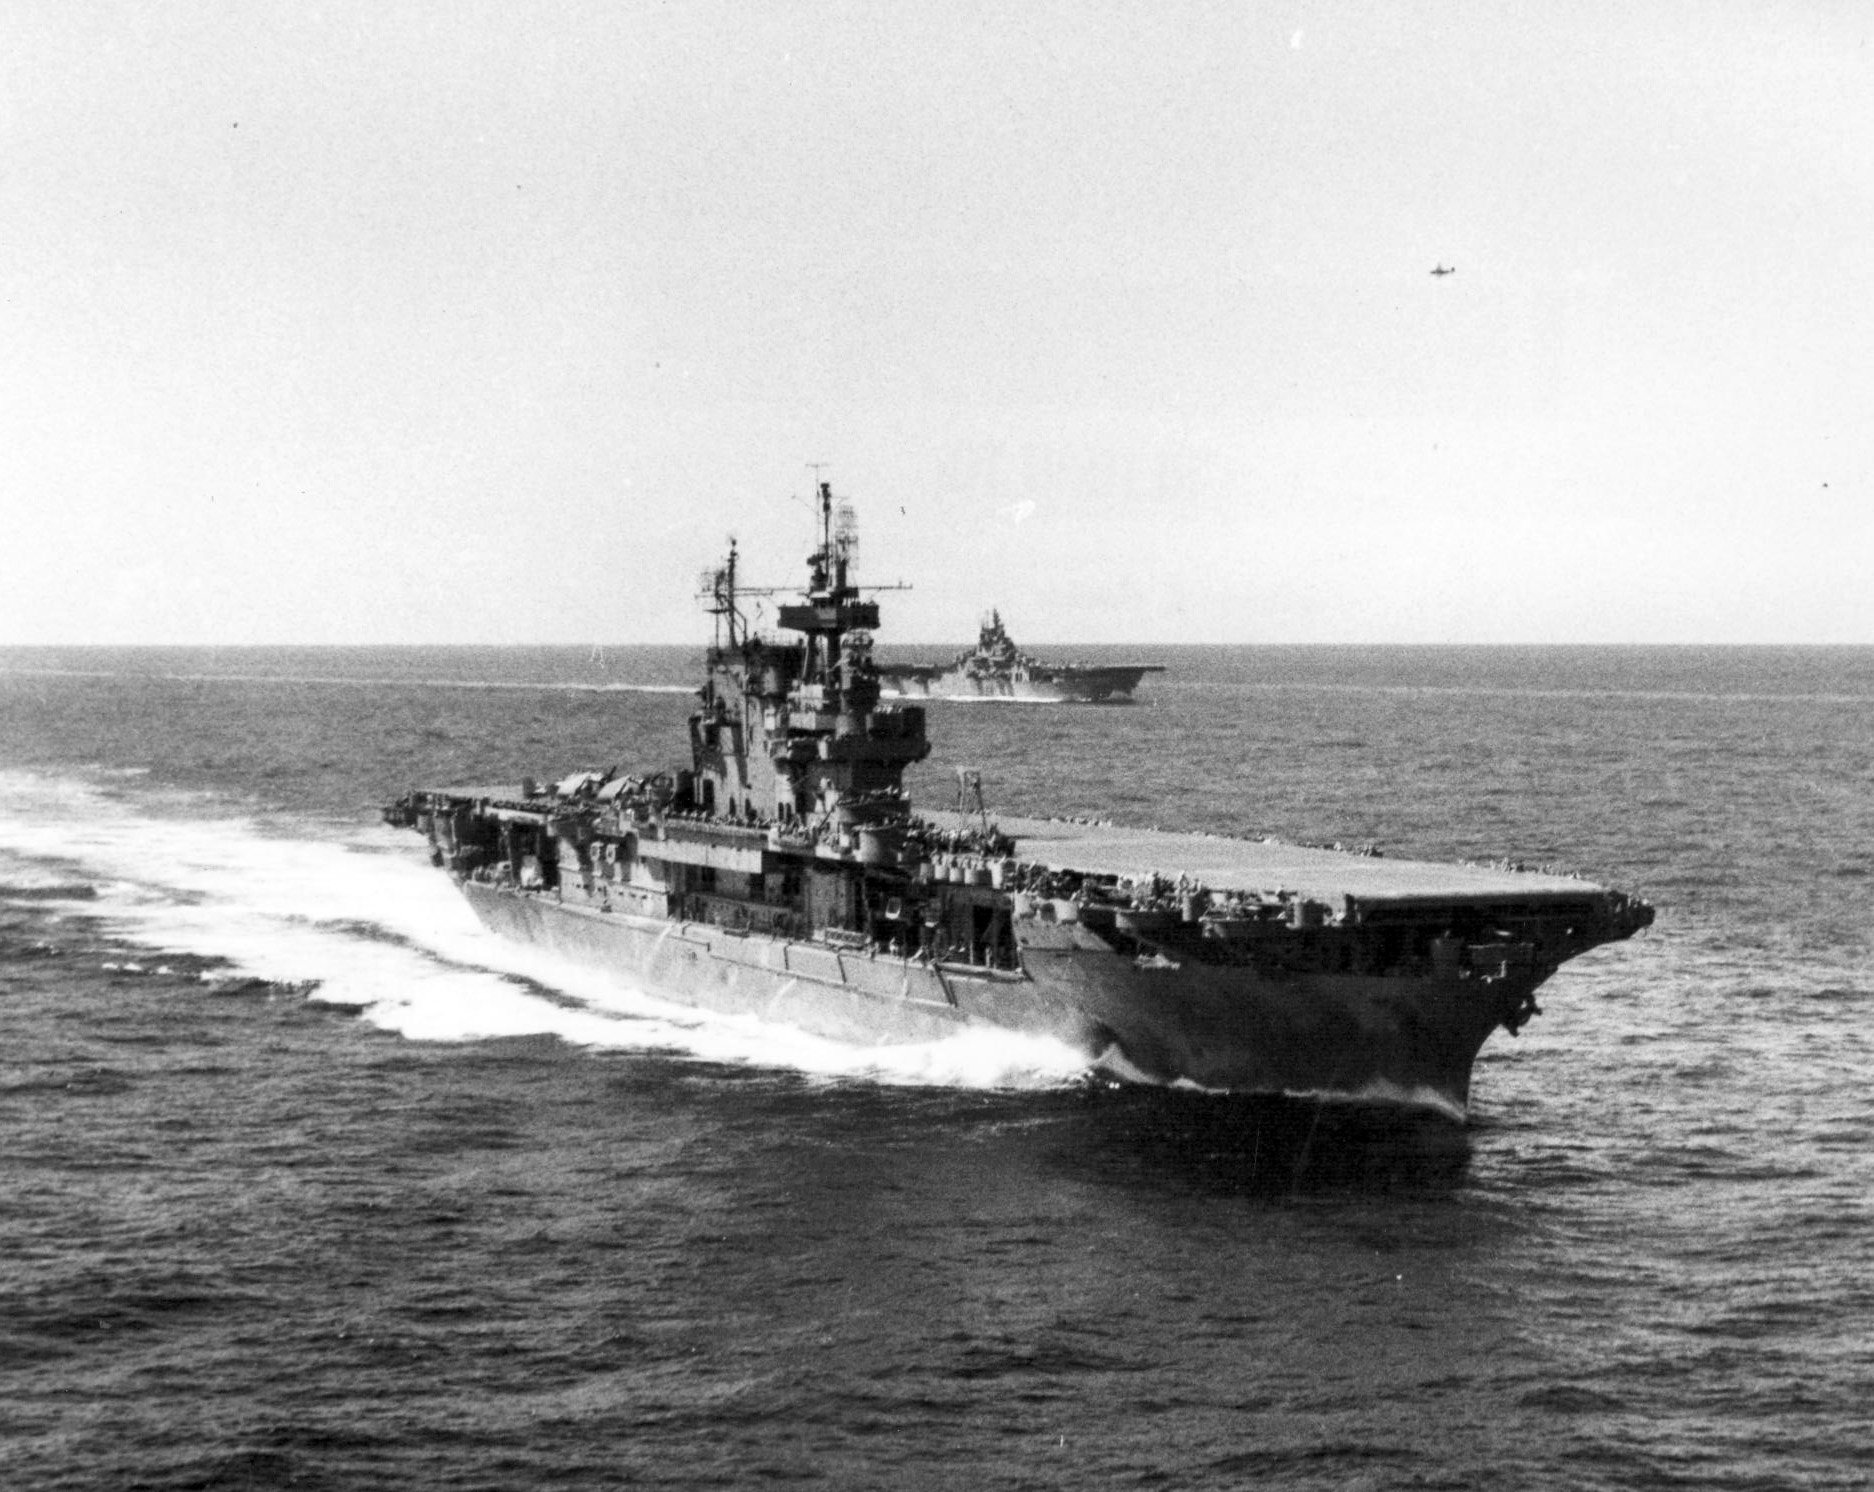 USS Enterprise steaming in company with USS Lexington (Essex-class) off the Mariana Islands, Jun 1944.